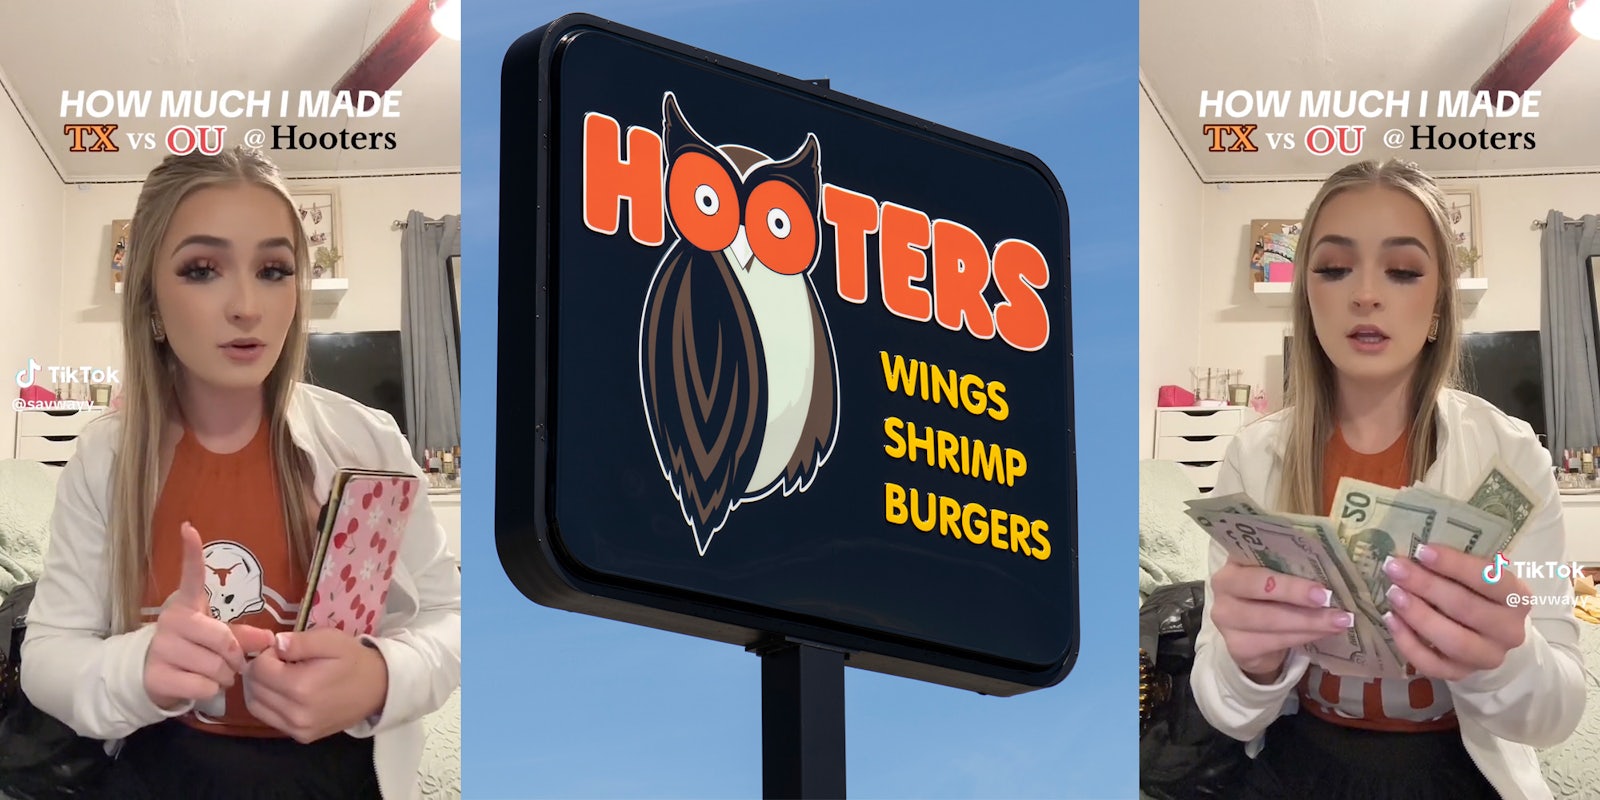 Woman speaking to the camera holding wallet(l), Hooters Sign(c), Same woman counting money(r)